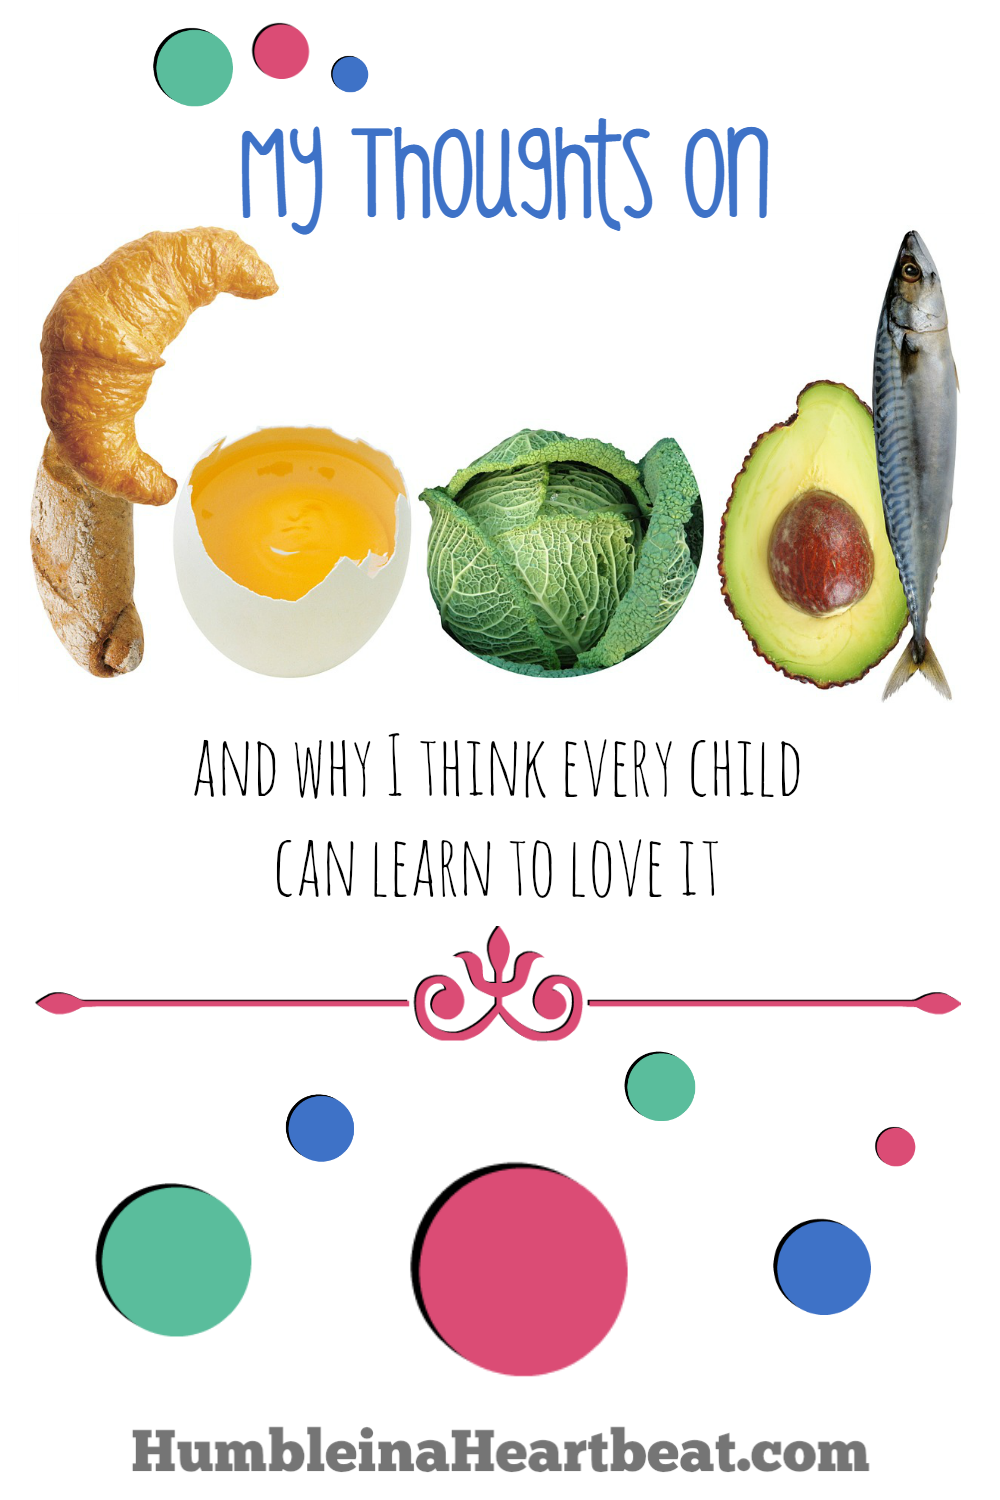 I believe that all kids can learn to love most foods if they are taught healthy eating habits. Would you agree?